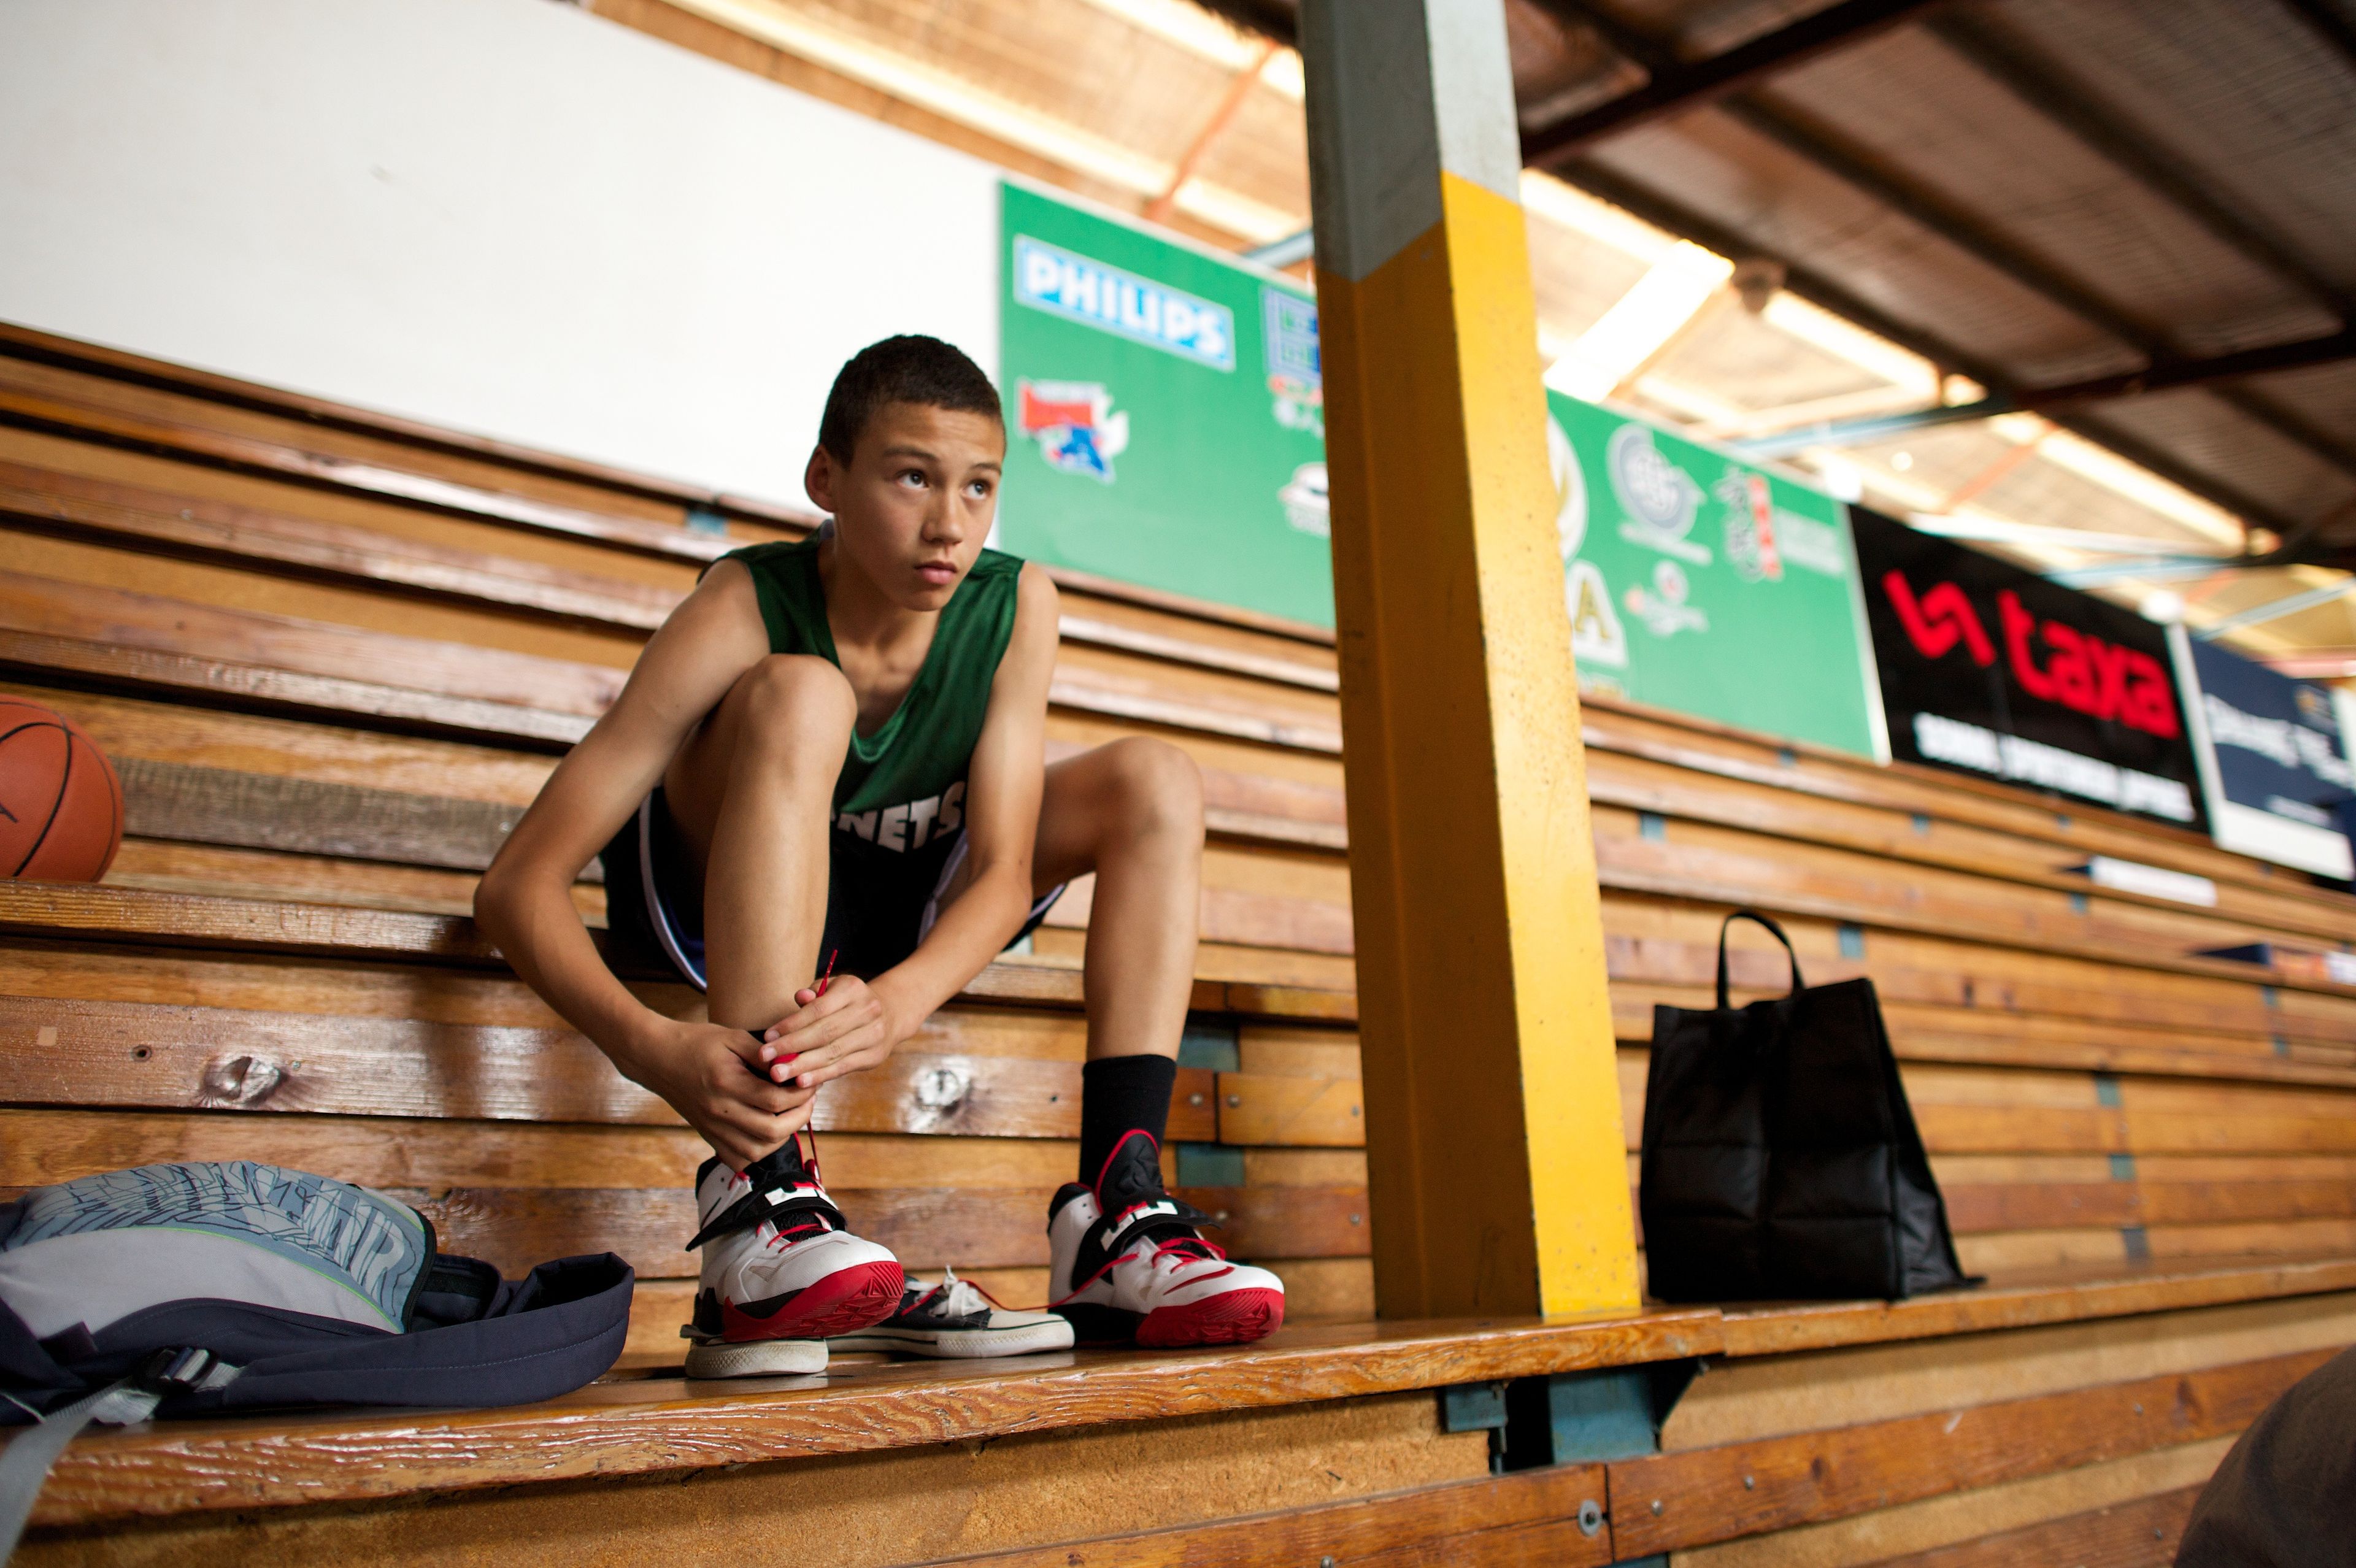 A young man in a basketball uniform sits on the bleachers, warming up as he prepares to go out on the basketball court.